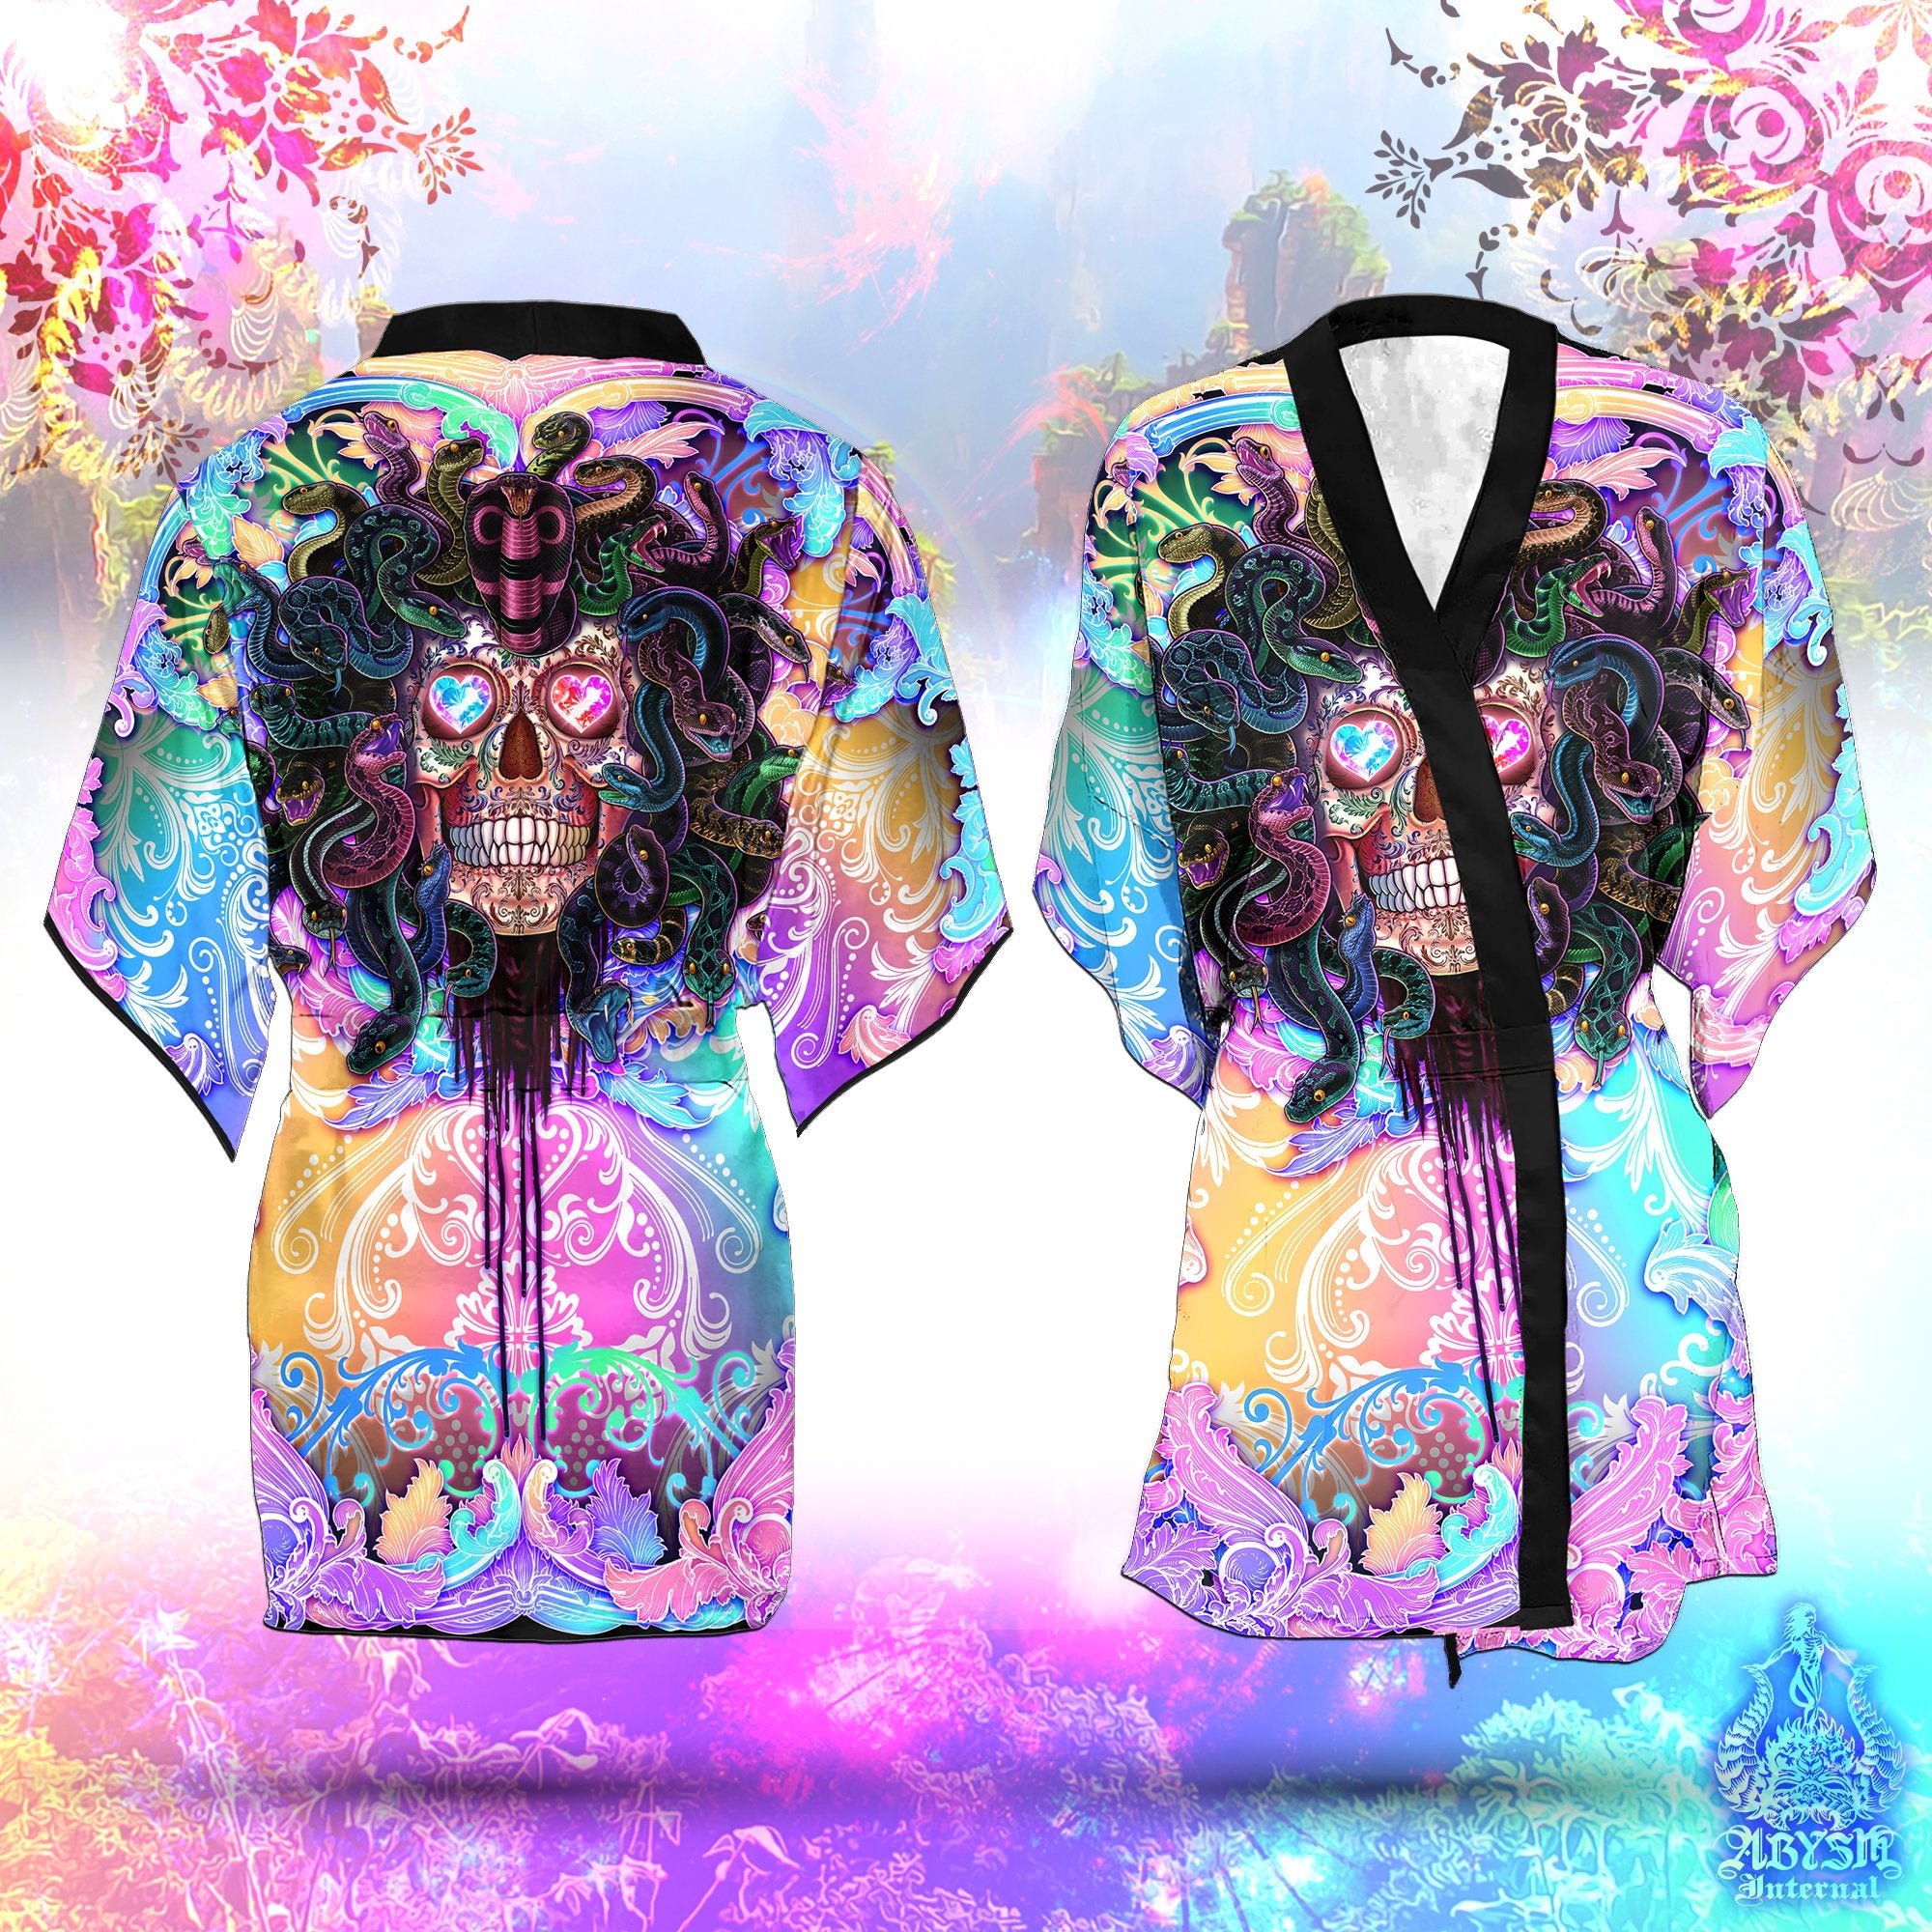 Rave Short Kimono Robe, Beach Party Outfit, Psychedelic Skull Coverup, Funky Summer Festival, Aesthetic Clothing, Unisex - Medusa, Pastel Punk Black, 4 Faces - Abysm Internal